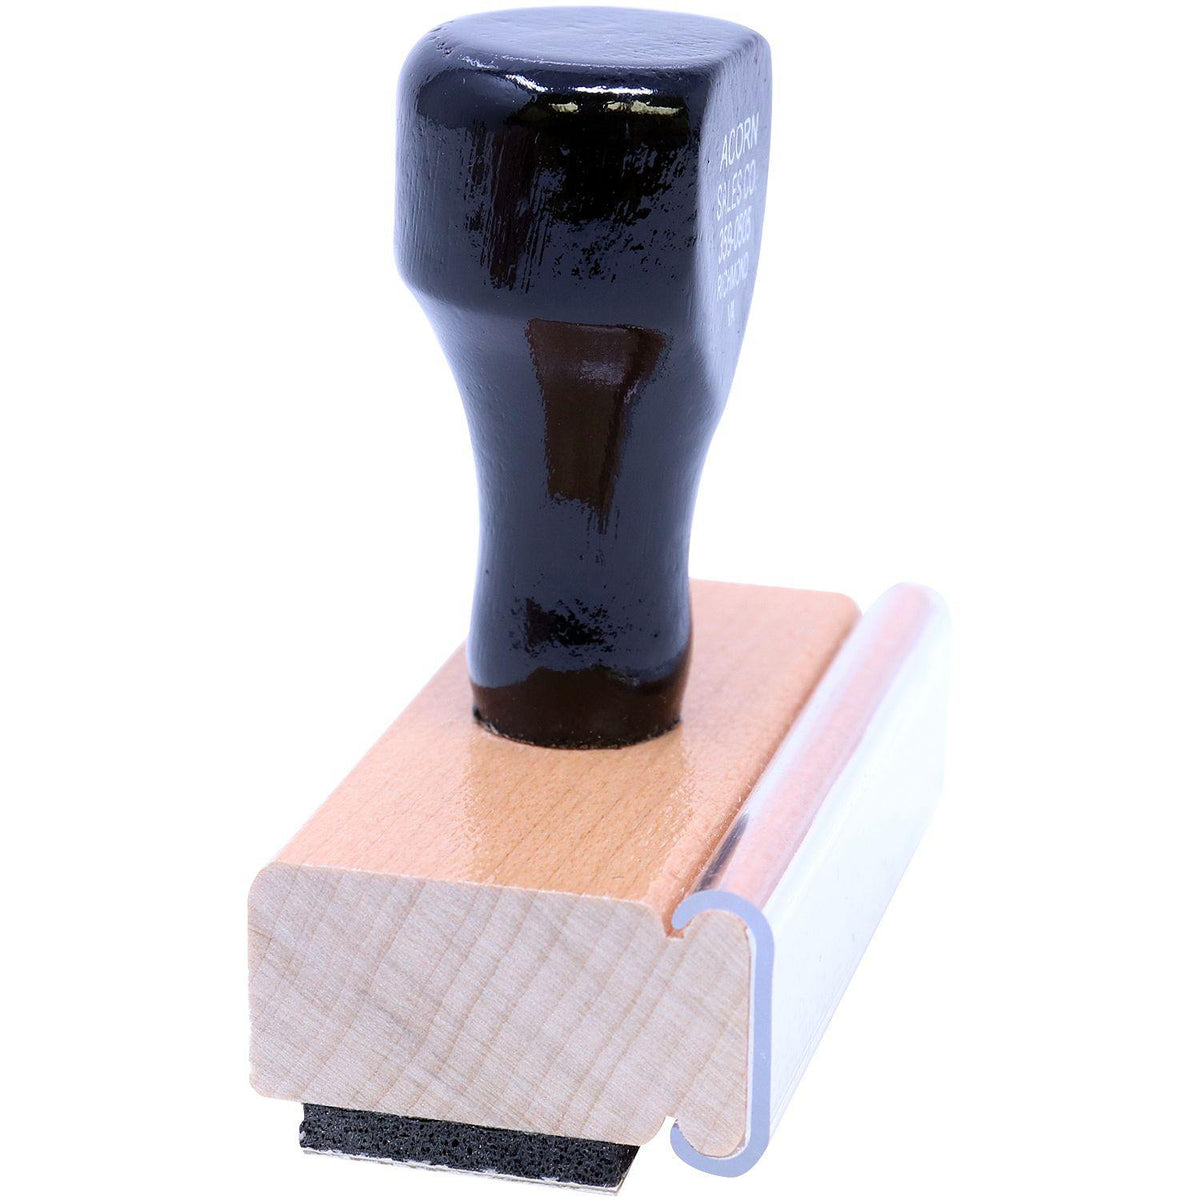 Petition Rubber Stamp - Engineer Seal Stamps - Brand_Acorn, Impression Size_Small, Stamp Type_Regular Stamp, Type of Use_Office, Type of Use_Professional